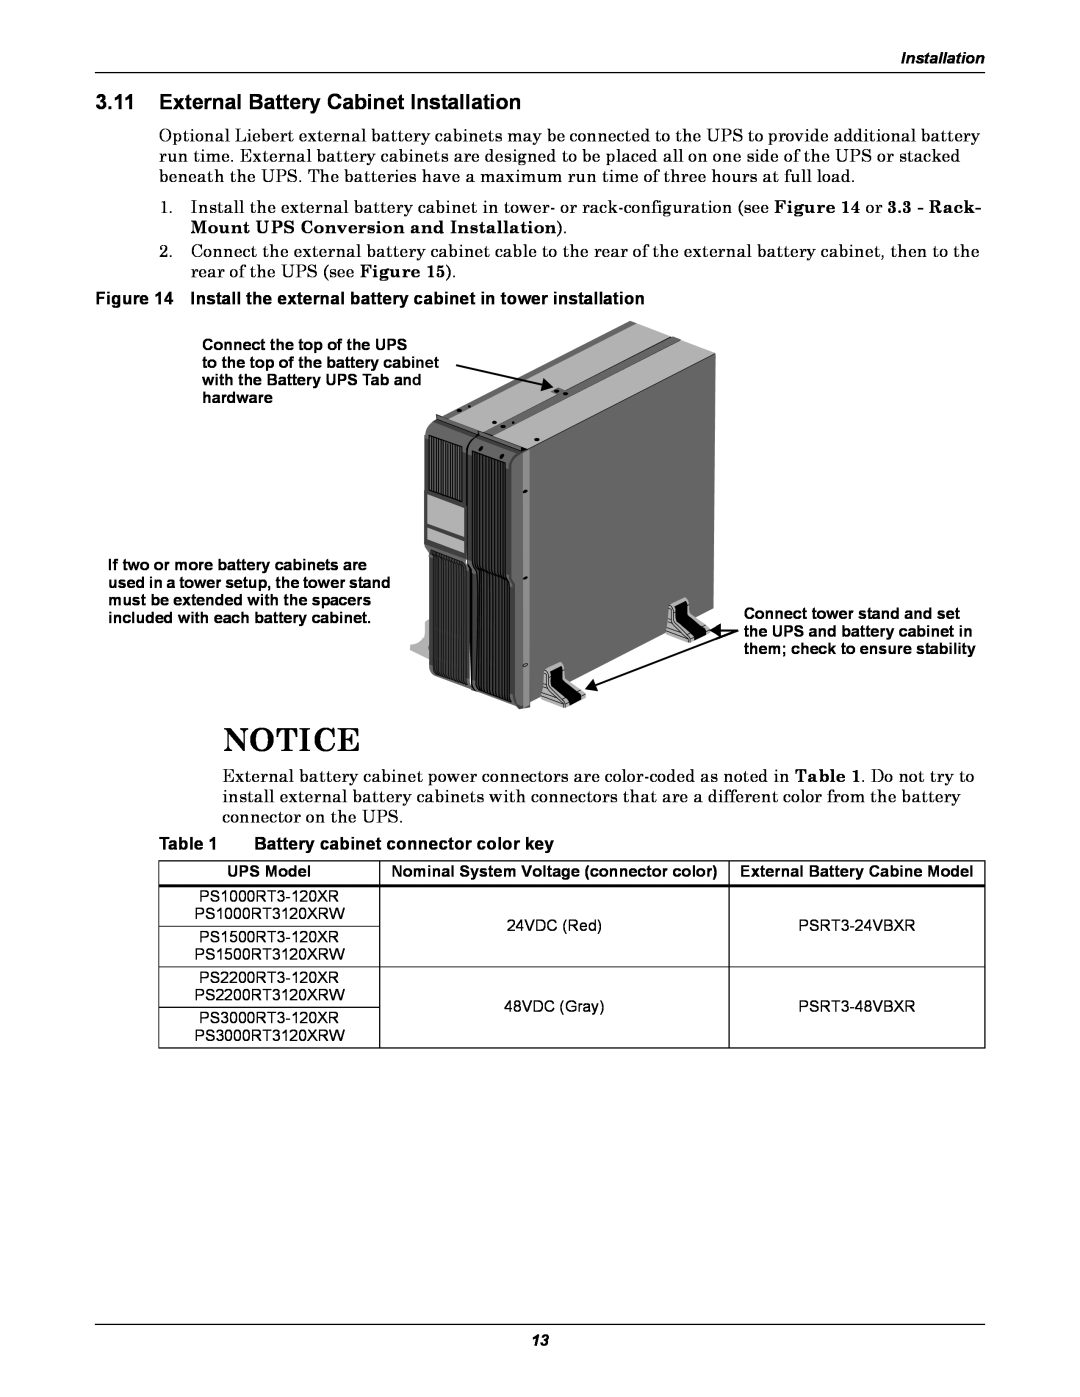 Emerson 1500, 3000, 1000, 2200 Notice, 3.11External Battery Cabinet Installation, Battery cabinet connector color key 